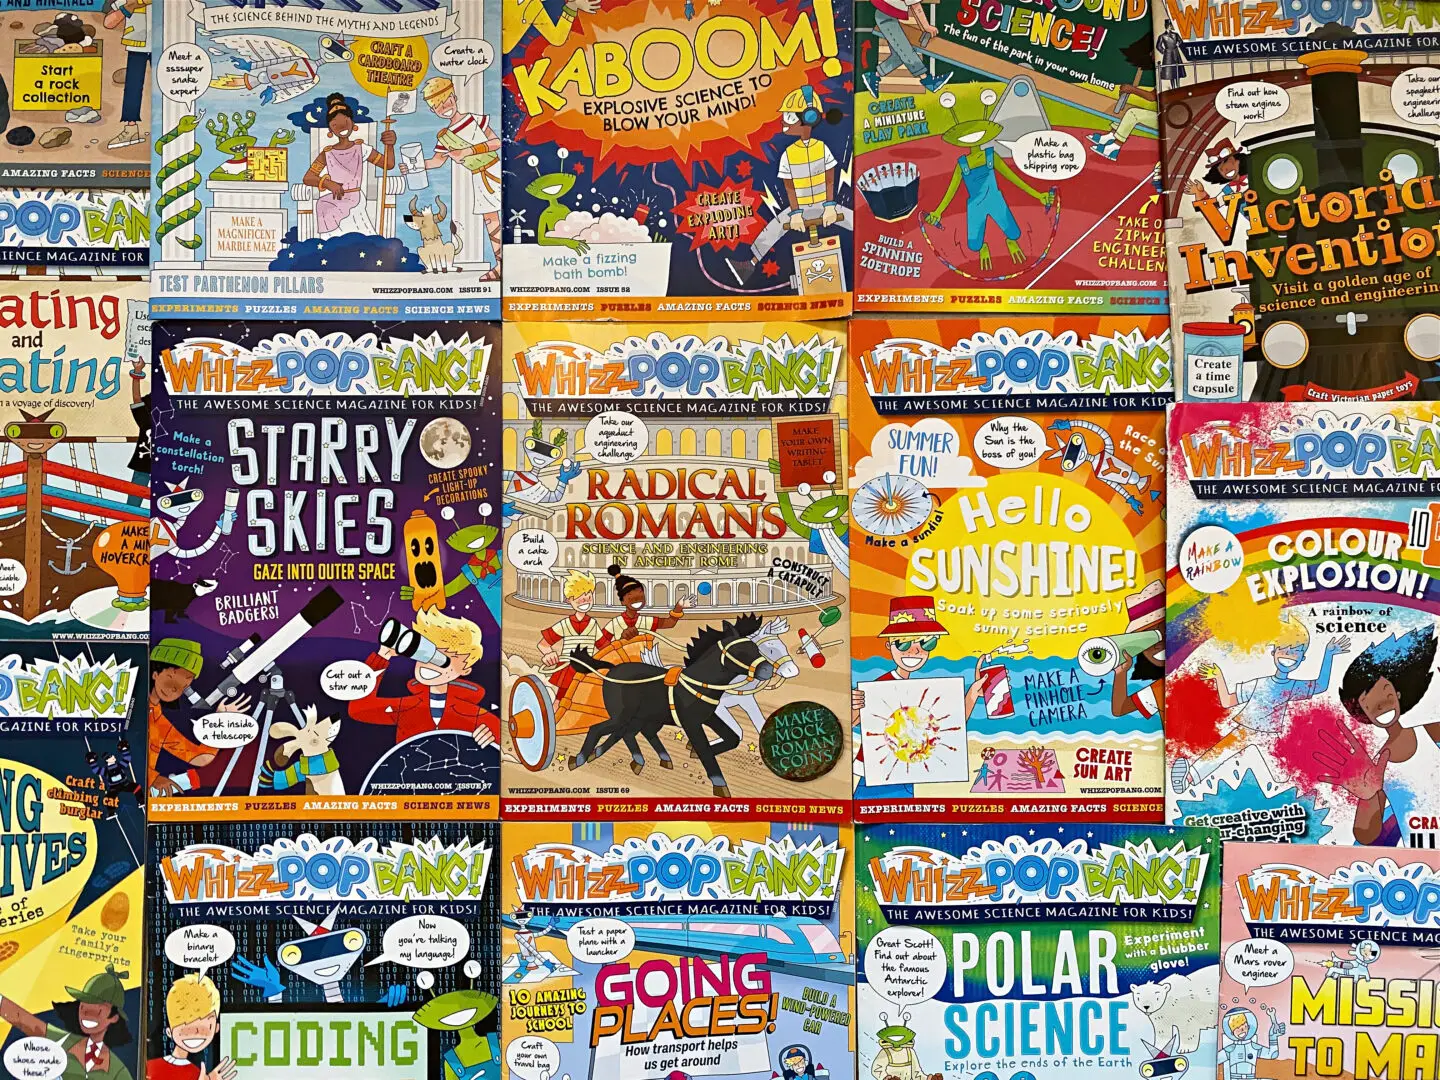 Display of Whizz Pop Bang magazine covers